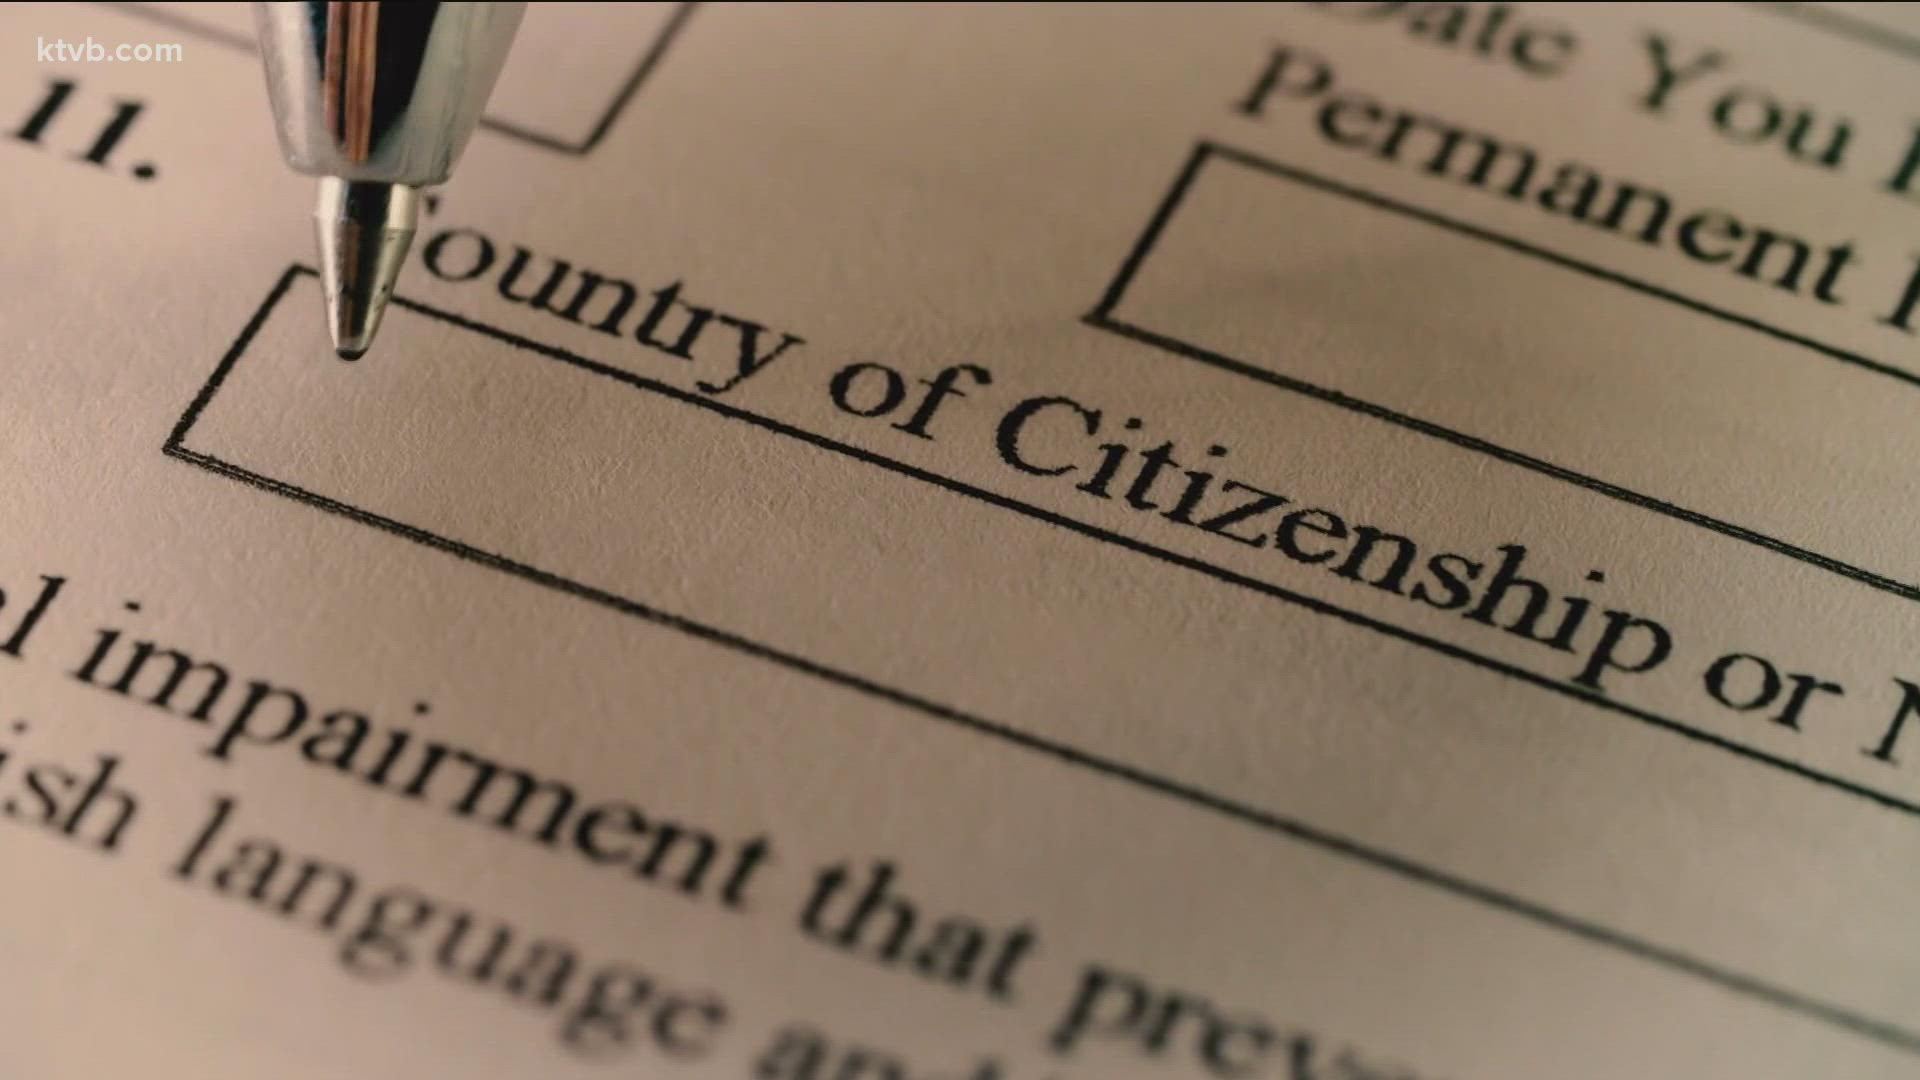 Vaccine requirements for those applying to become lawful permanent residents have been in place for years.